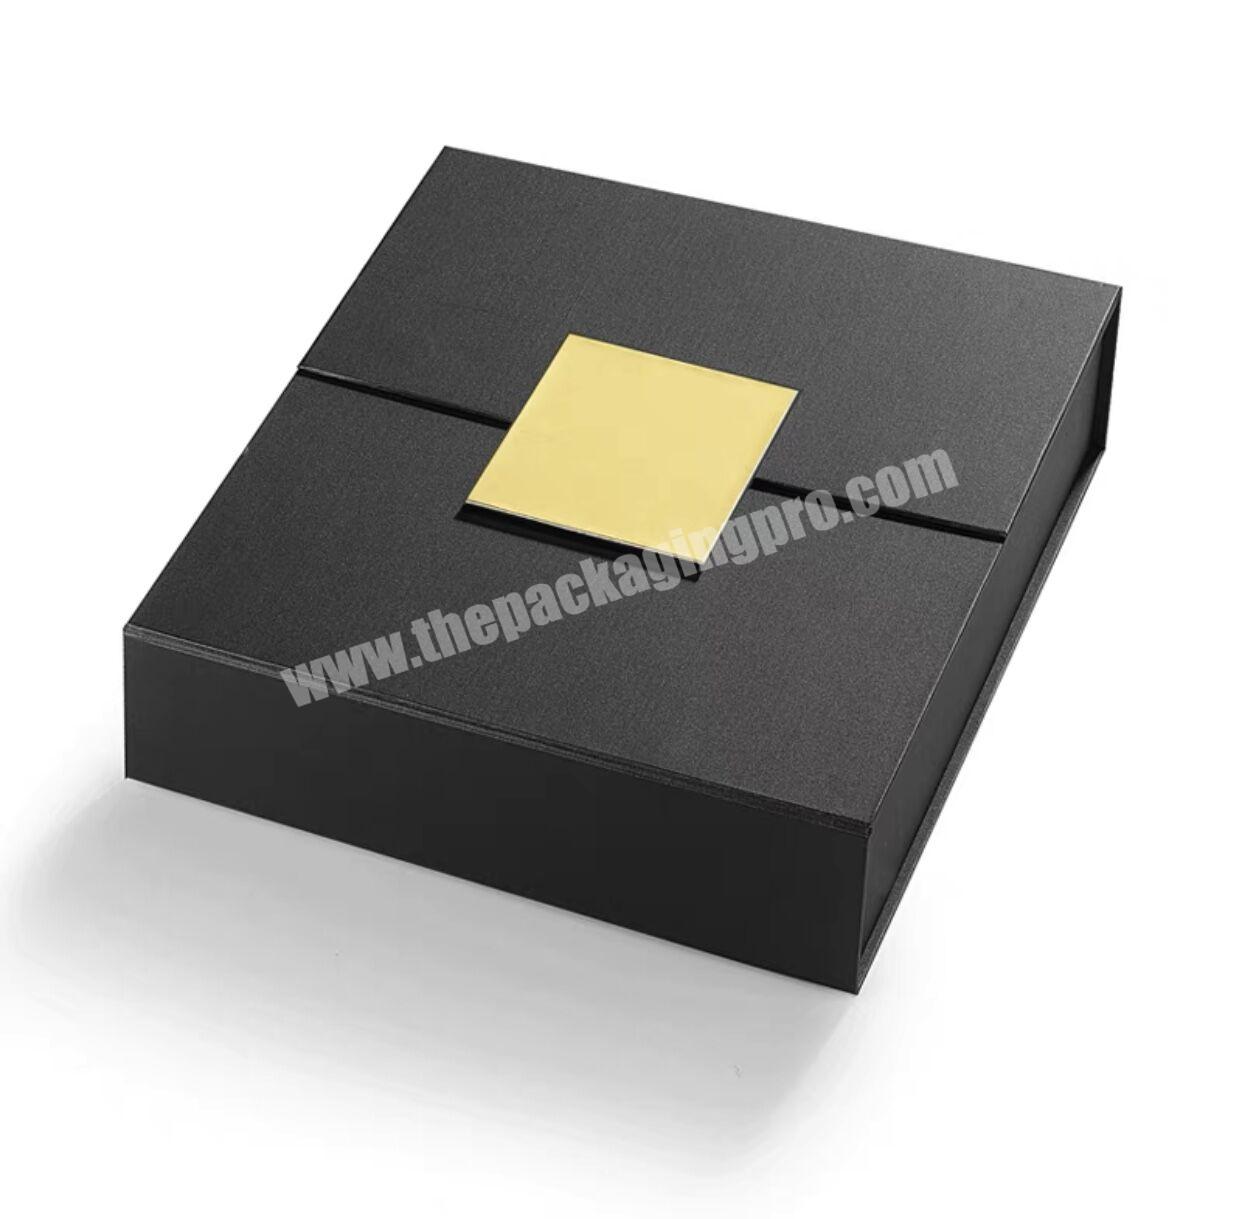 Red Black White Folding Box 3M Adhesive Skin Care Products Flip-top Type Magnetic Sealed Box Gift Box Packaging